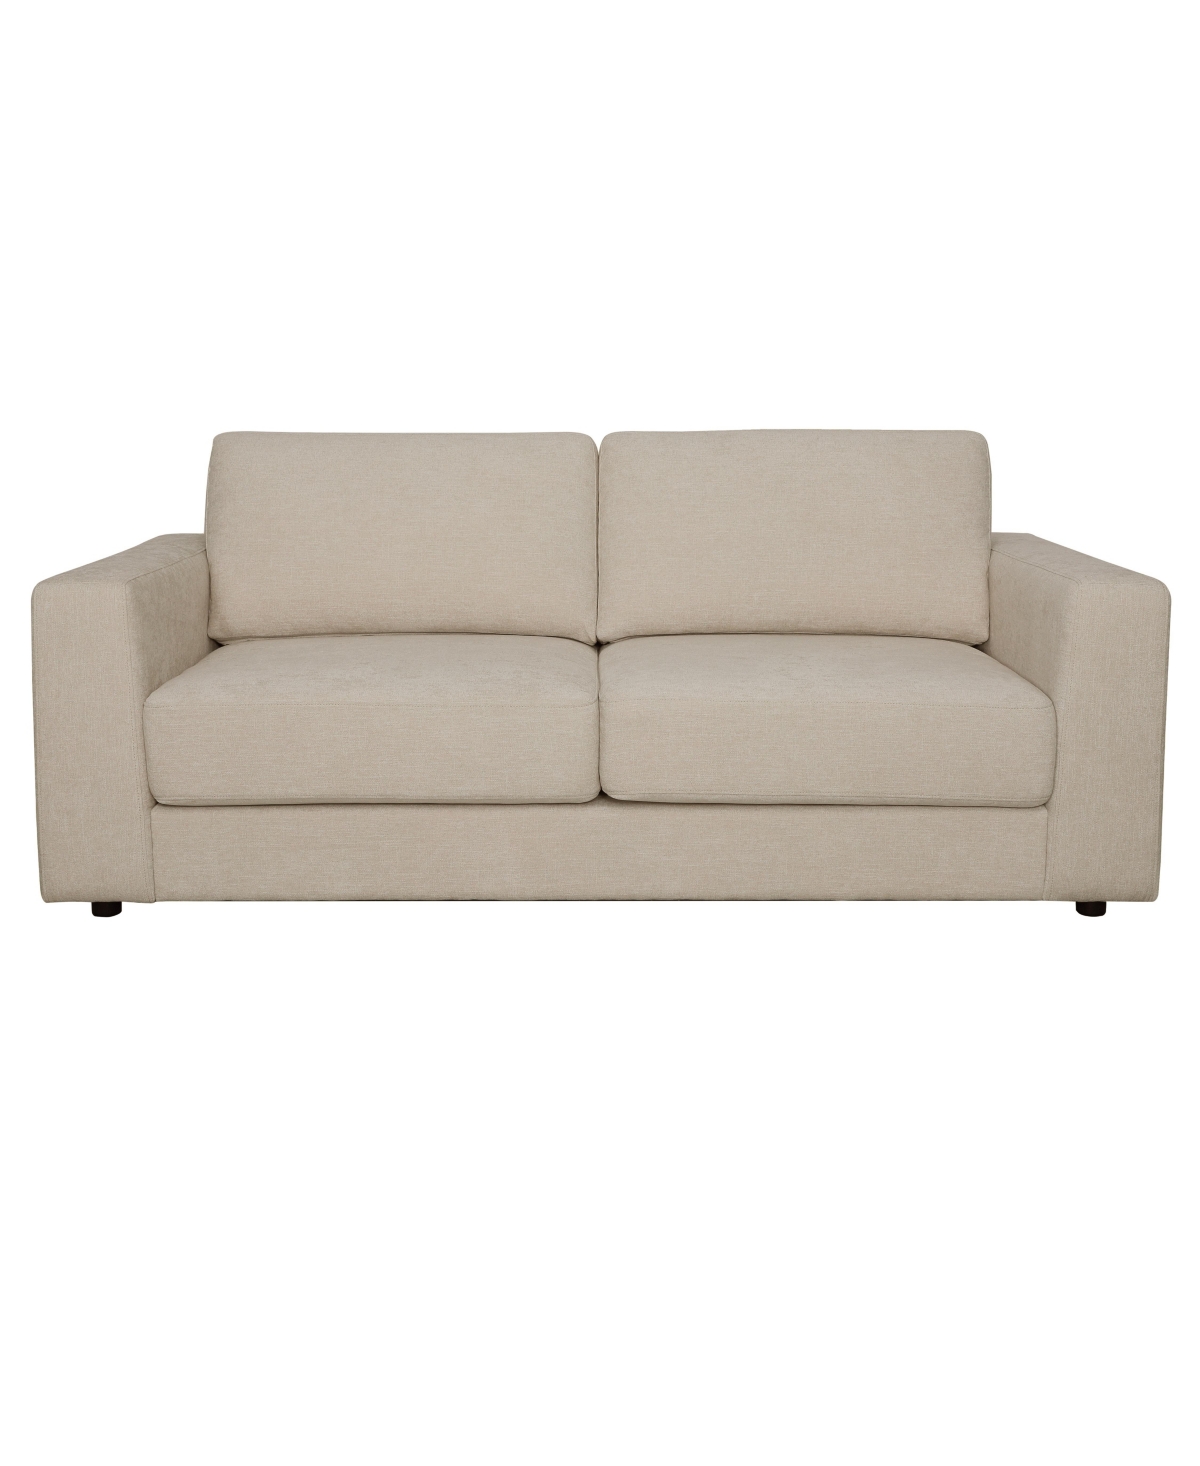 Abbyson Living Elizabeth 84" Stain-resistant Fabric Sofa In Sand